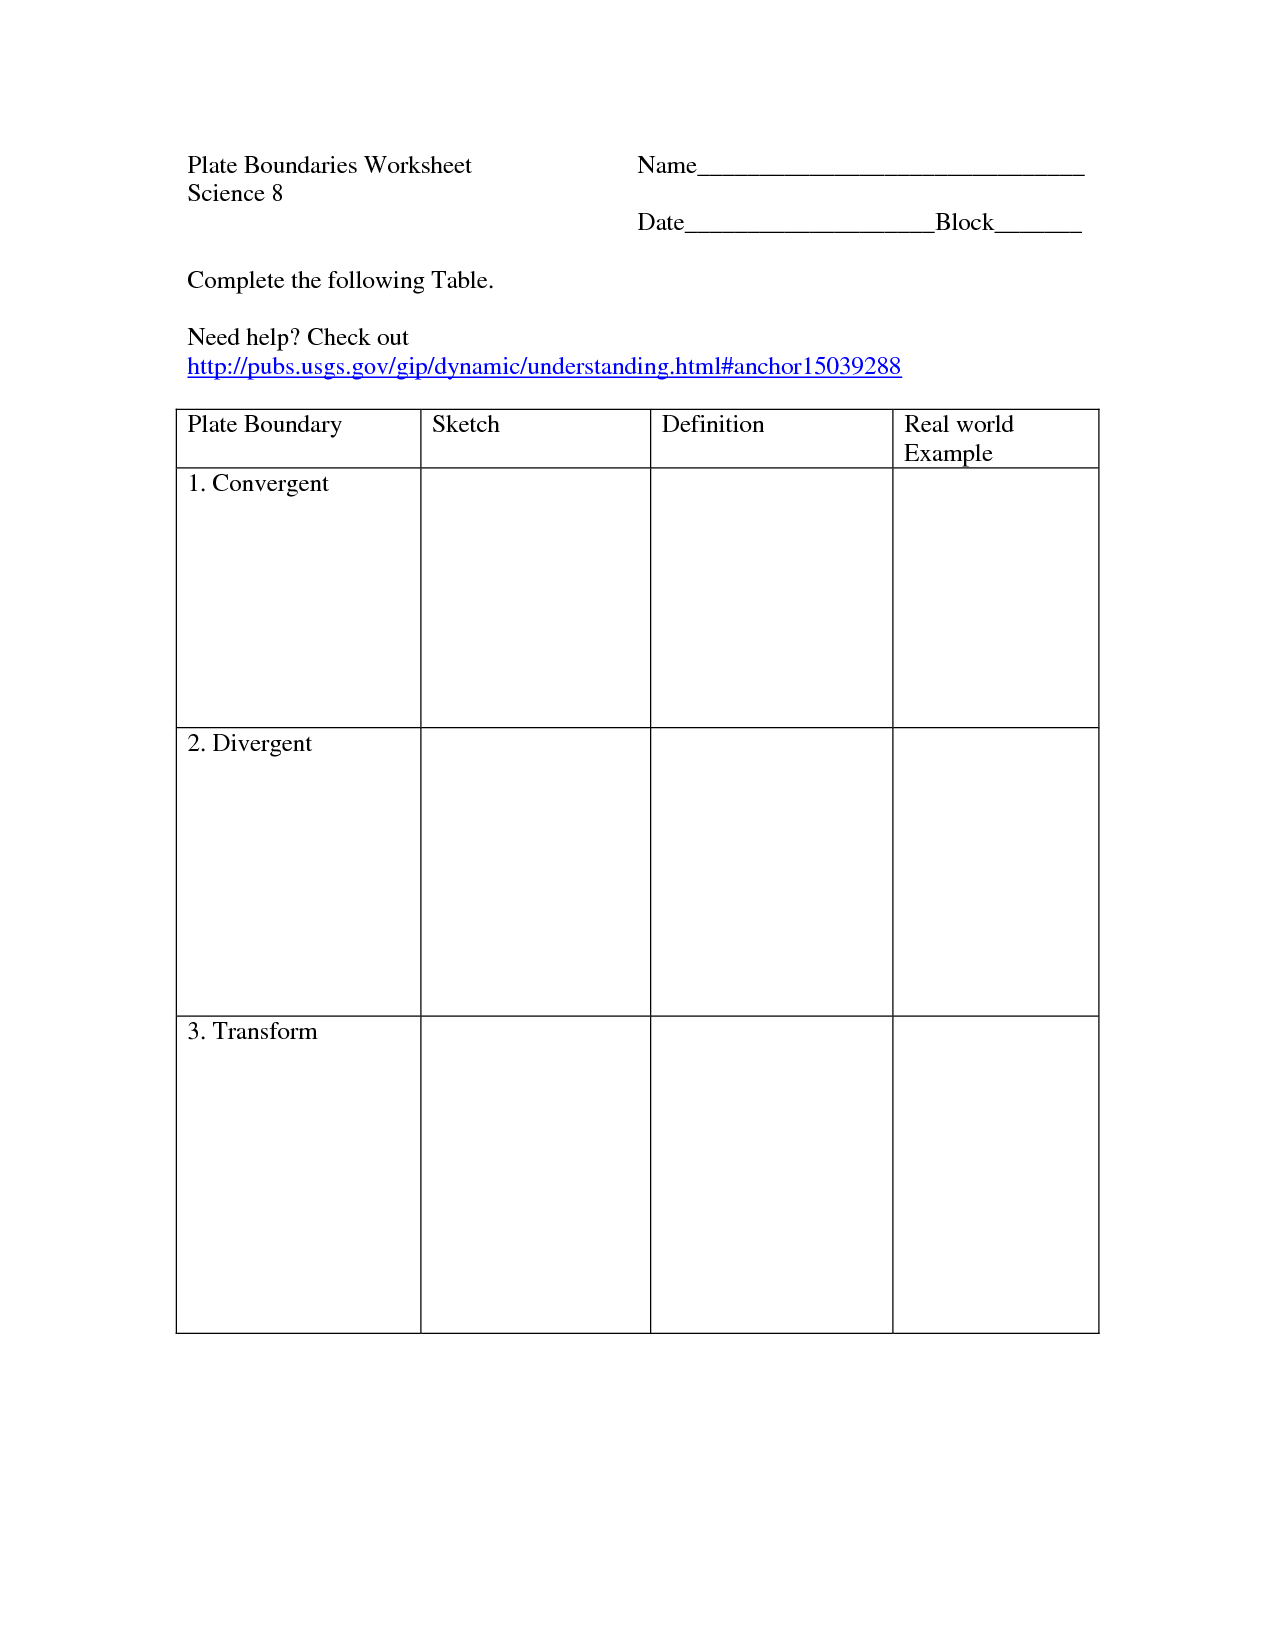 Personal Boundary Worksheets Image